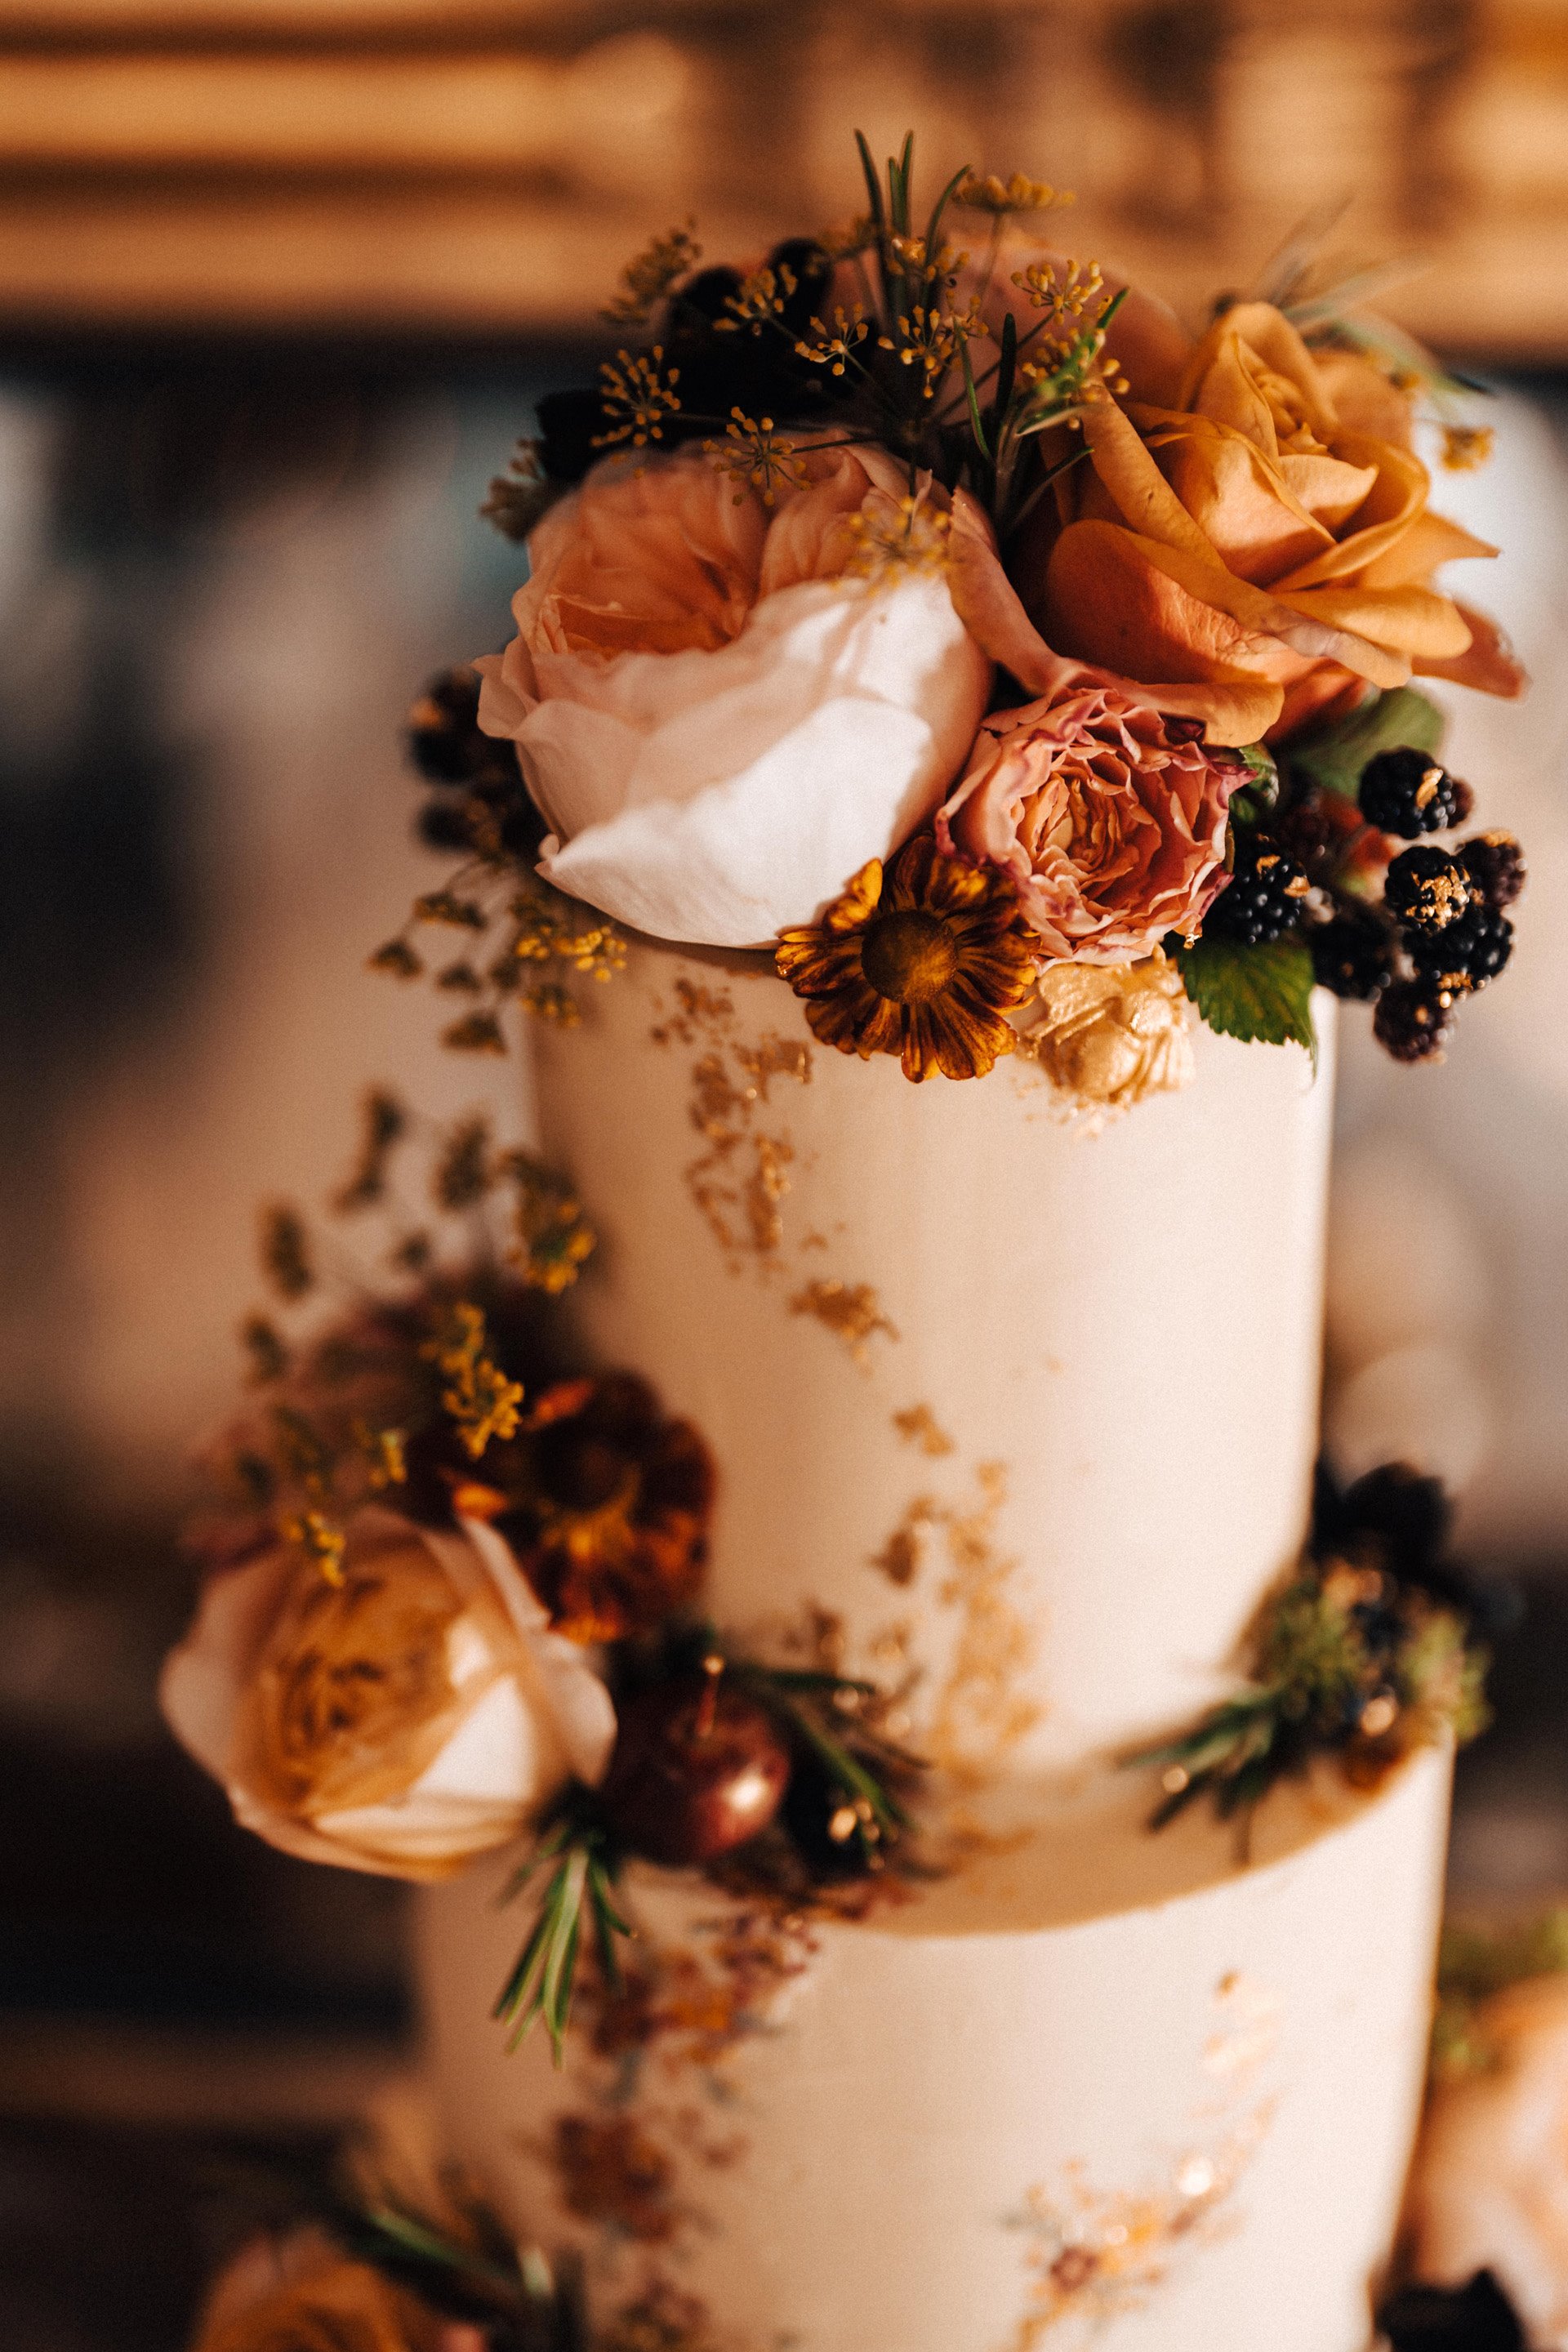 September wedding cake decorated with real flowers